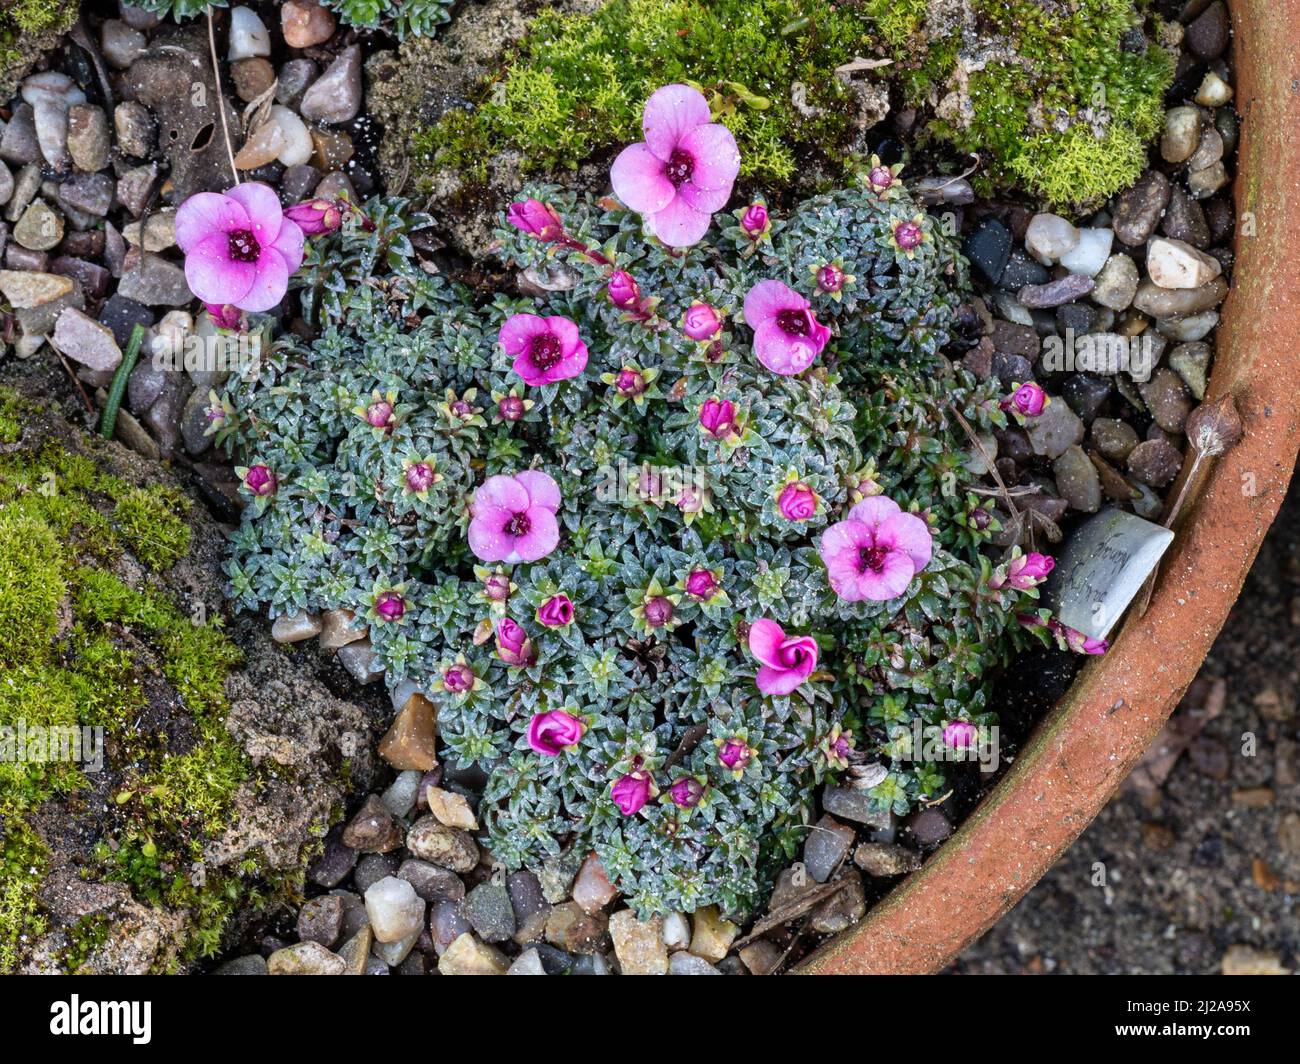 An encrusted mound of the early flowering kabschia Saxifraga Nanceye showing the delicate deep pink flowers Stock Photo